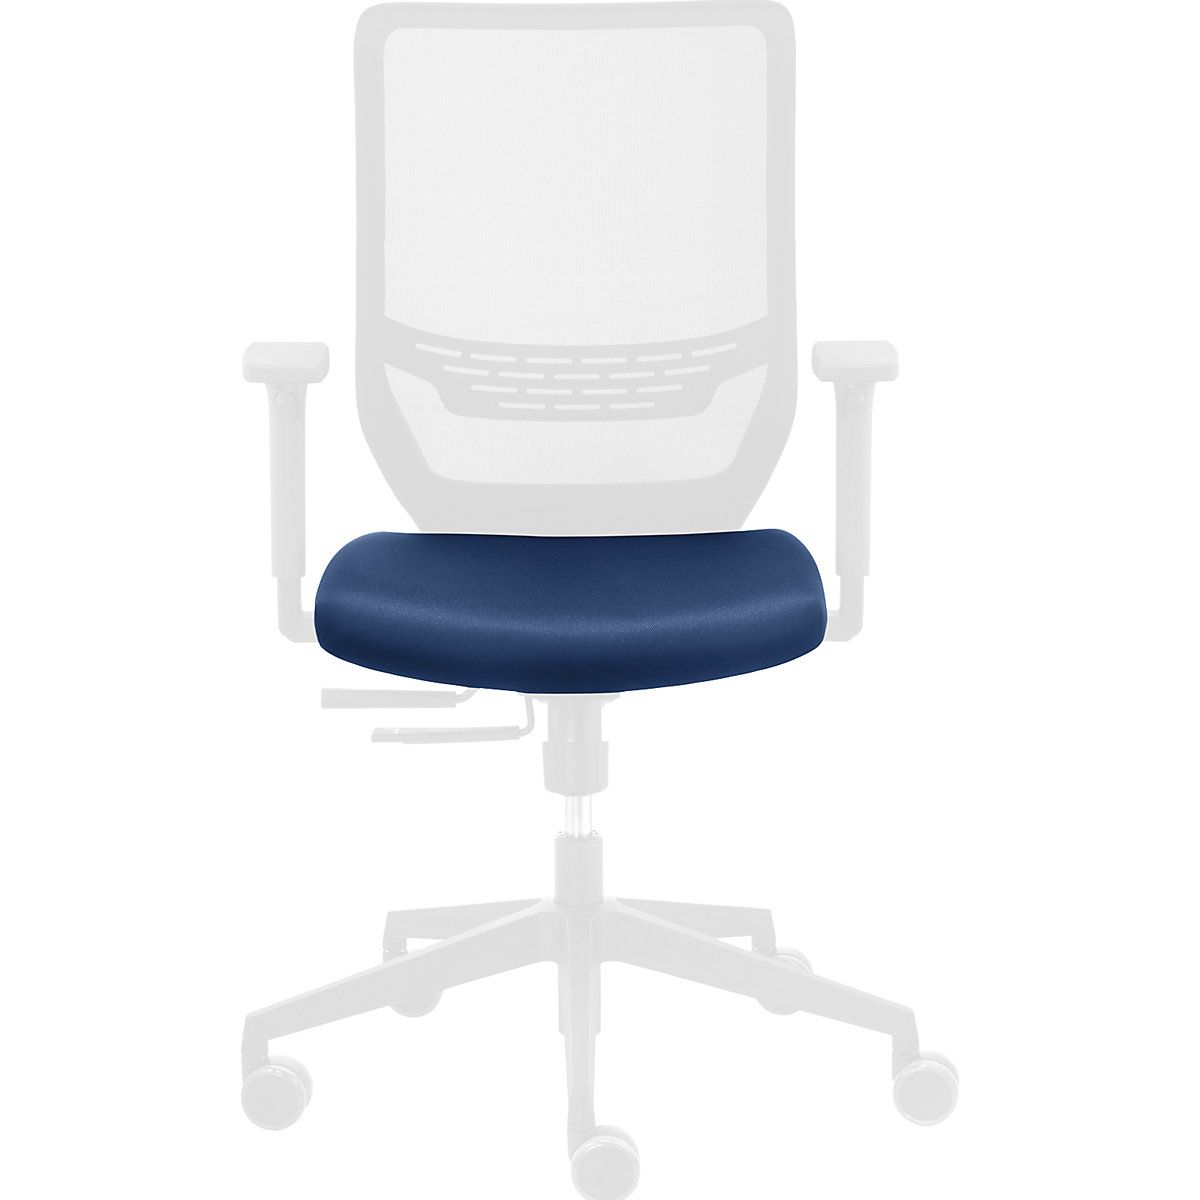 TO-SYNC seat cover – TrendOffice